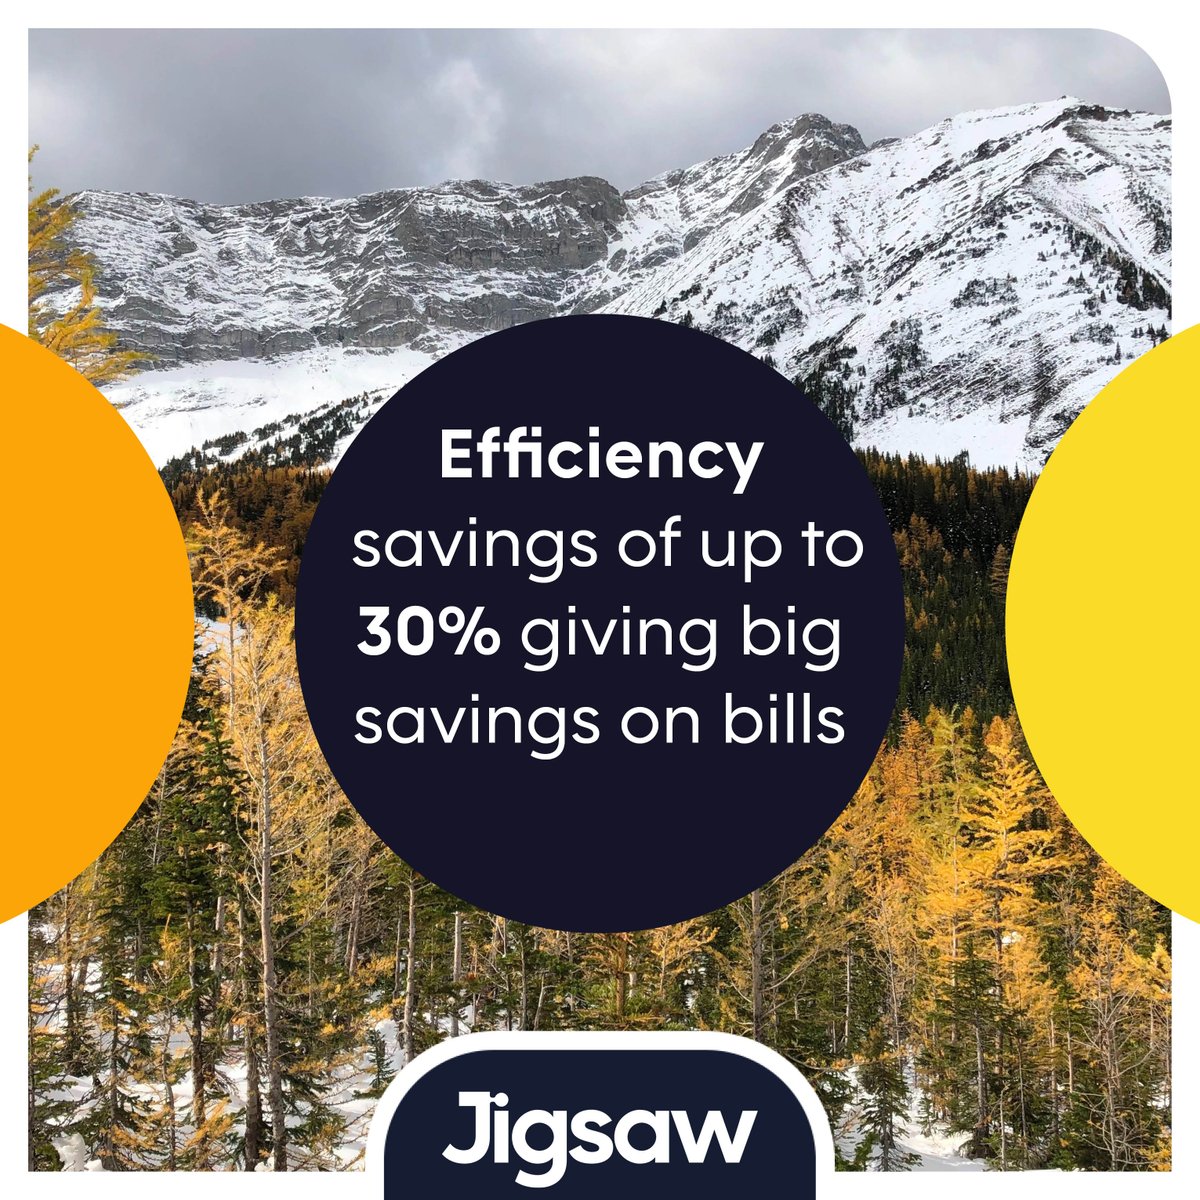 Our infrared heating panels have been tested and studies have found that you could save up to 30% on your energy bills. 🤩 

#bills #gas #electricheating #efficientheating #infraredheating #savings #efficiency #energycrisis #property #electric #renewableheating